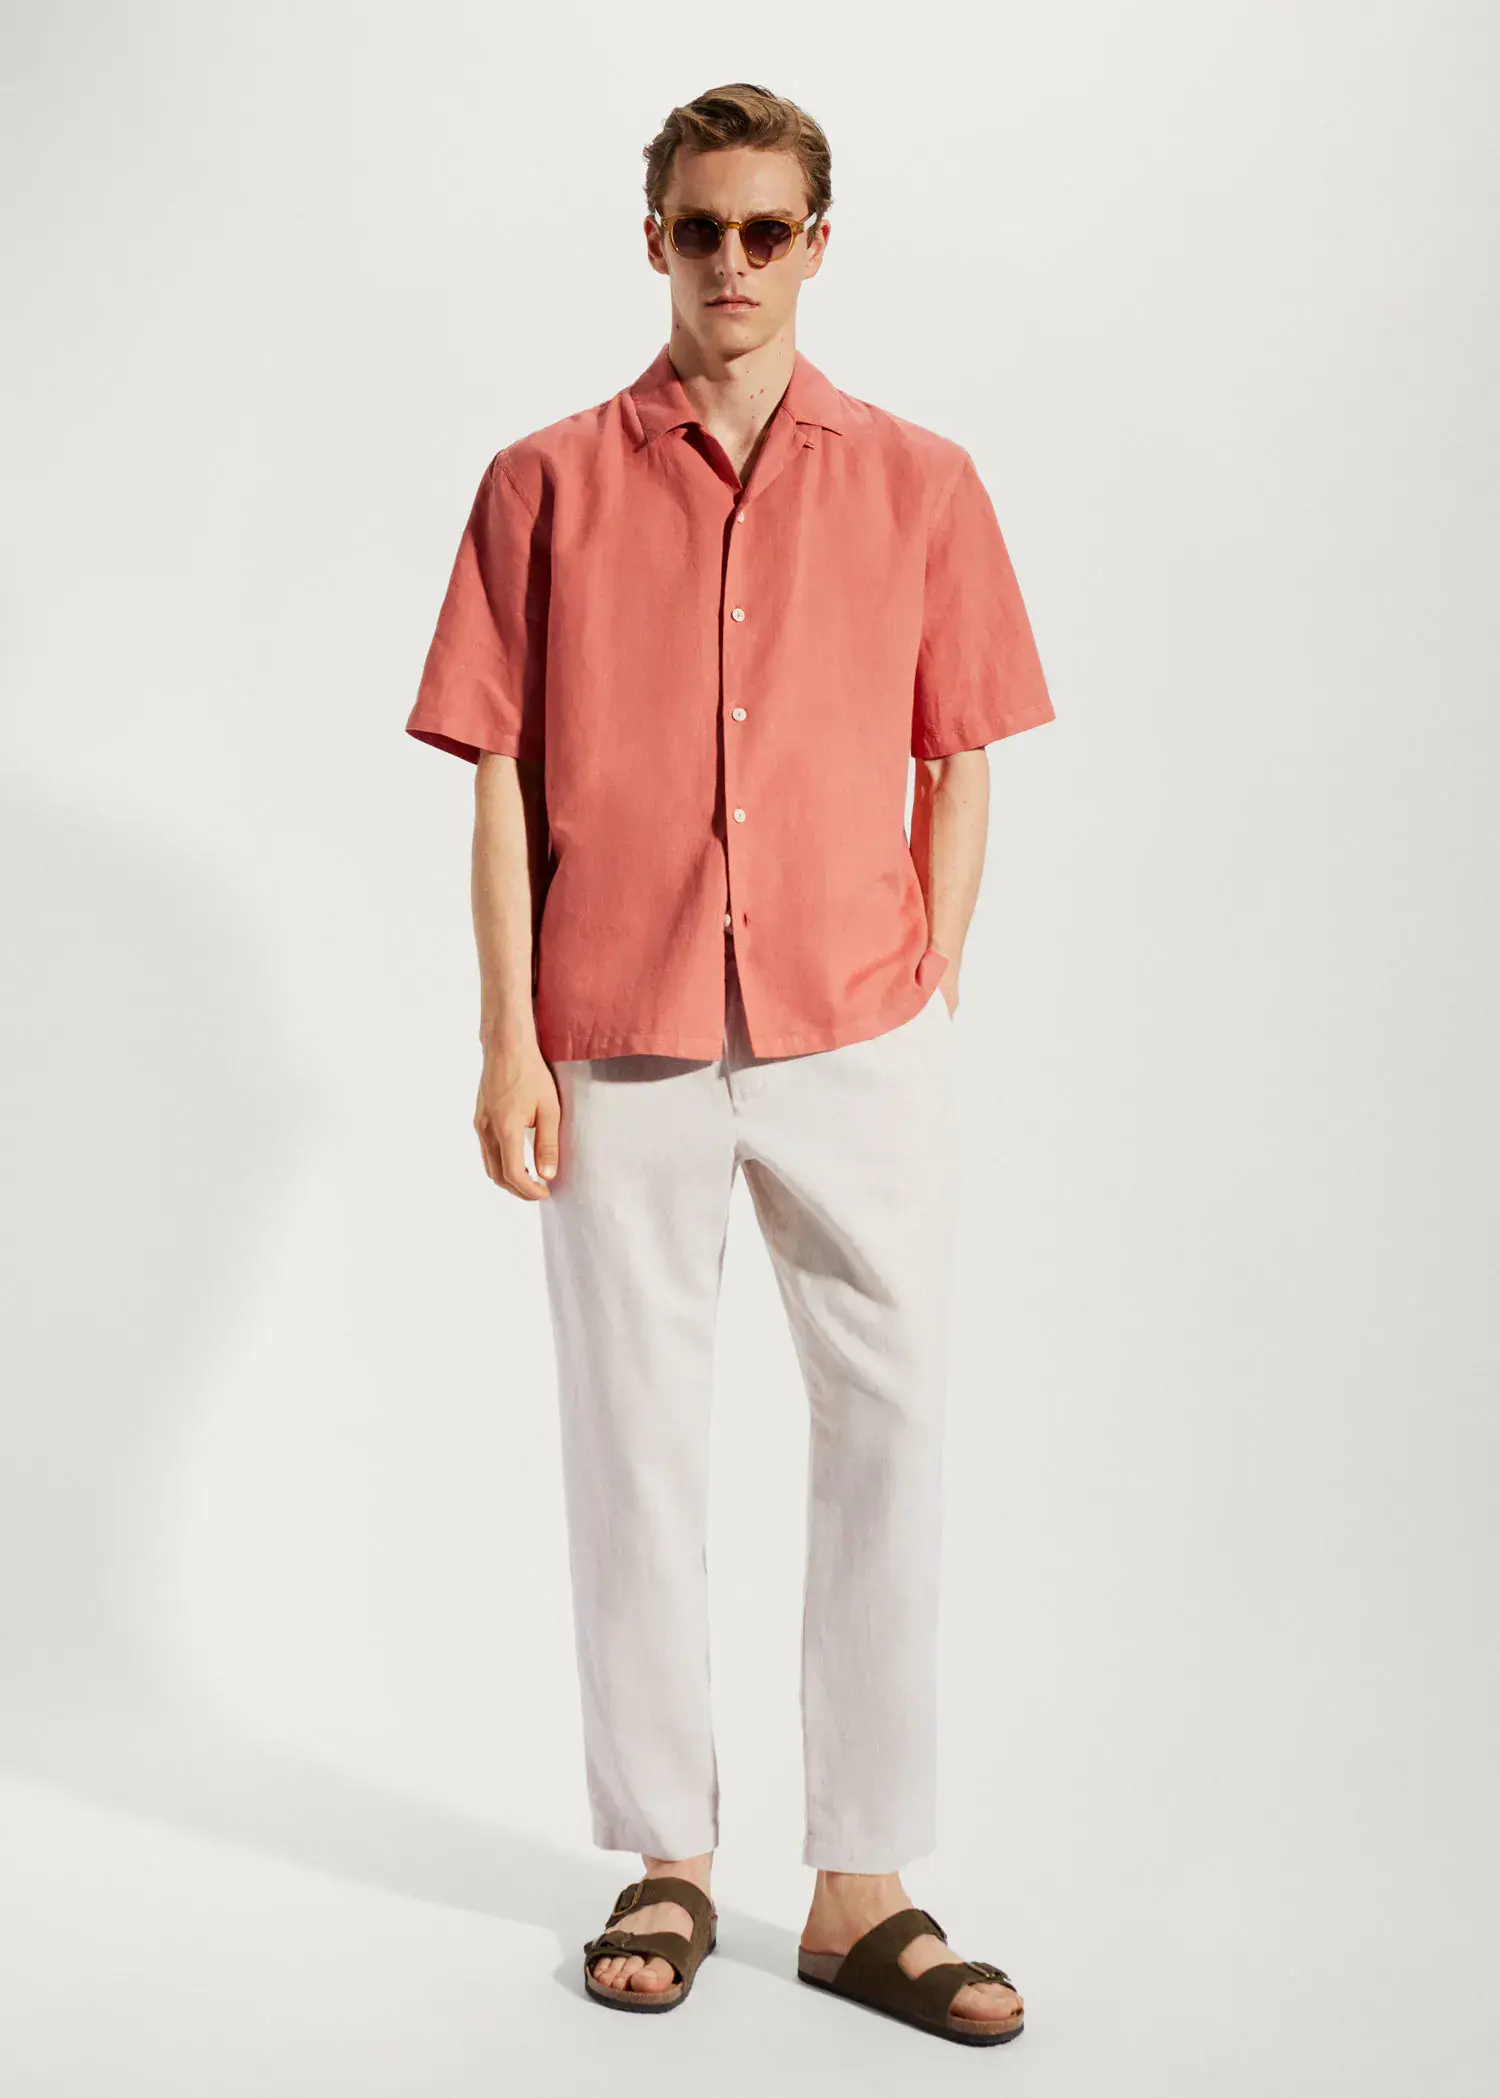 Mango Slim-fit pants with drawstring . a man wearing a red shirt and white pants. 